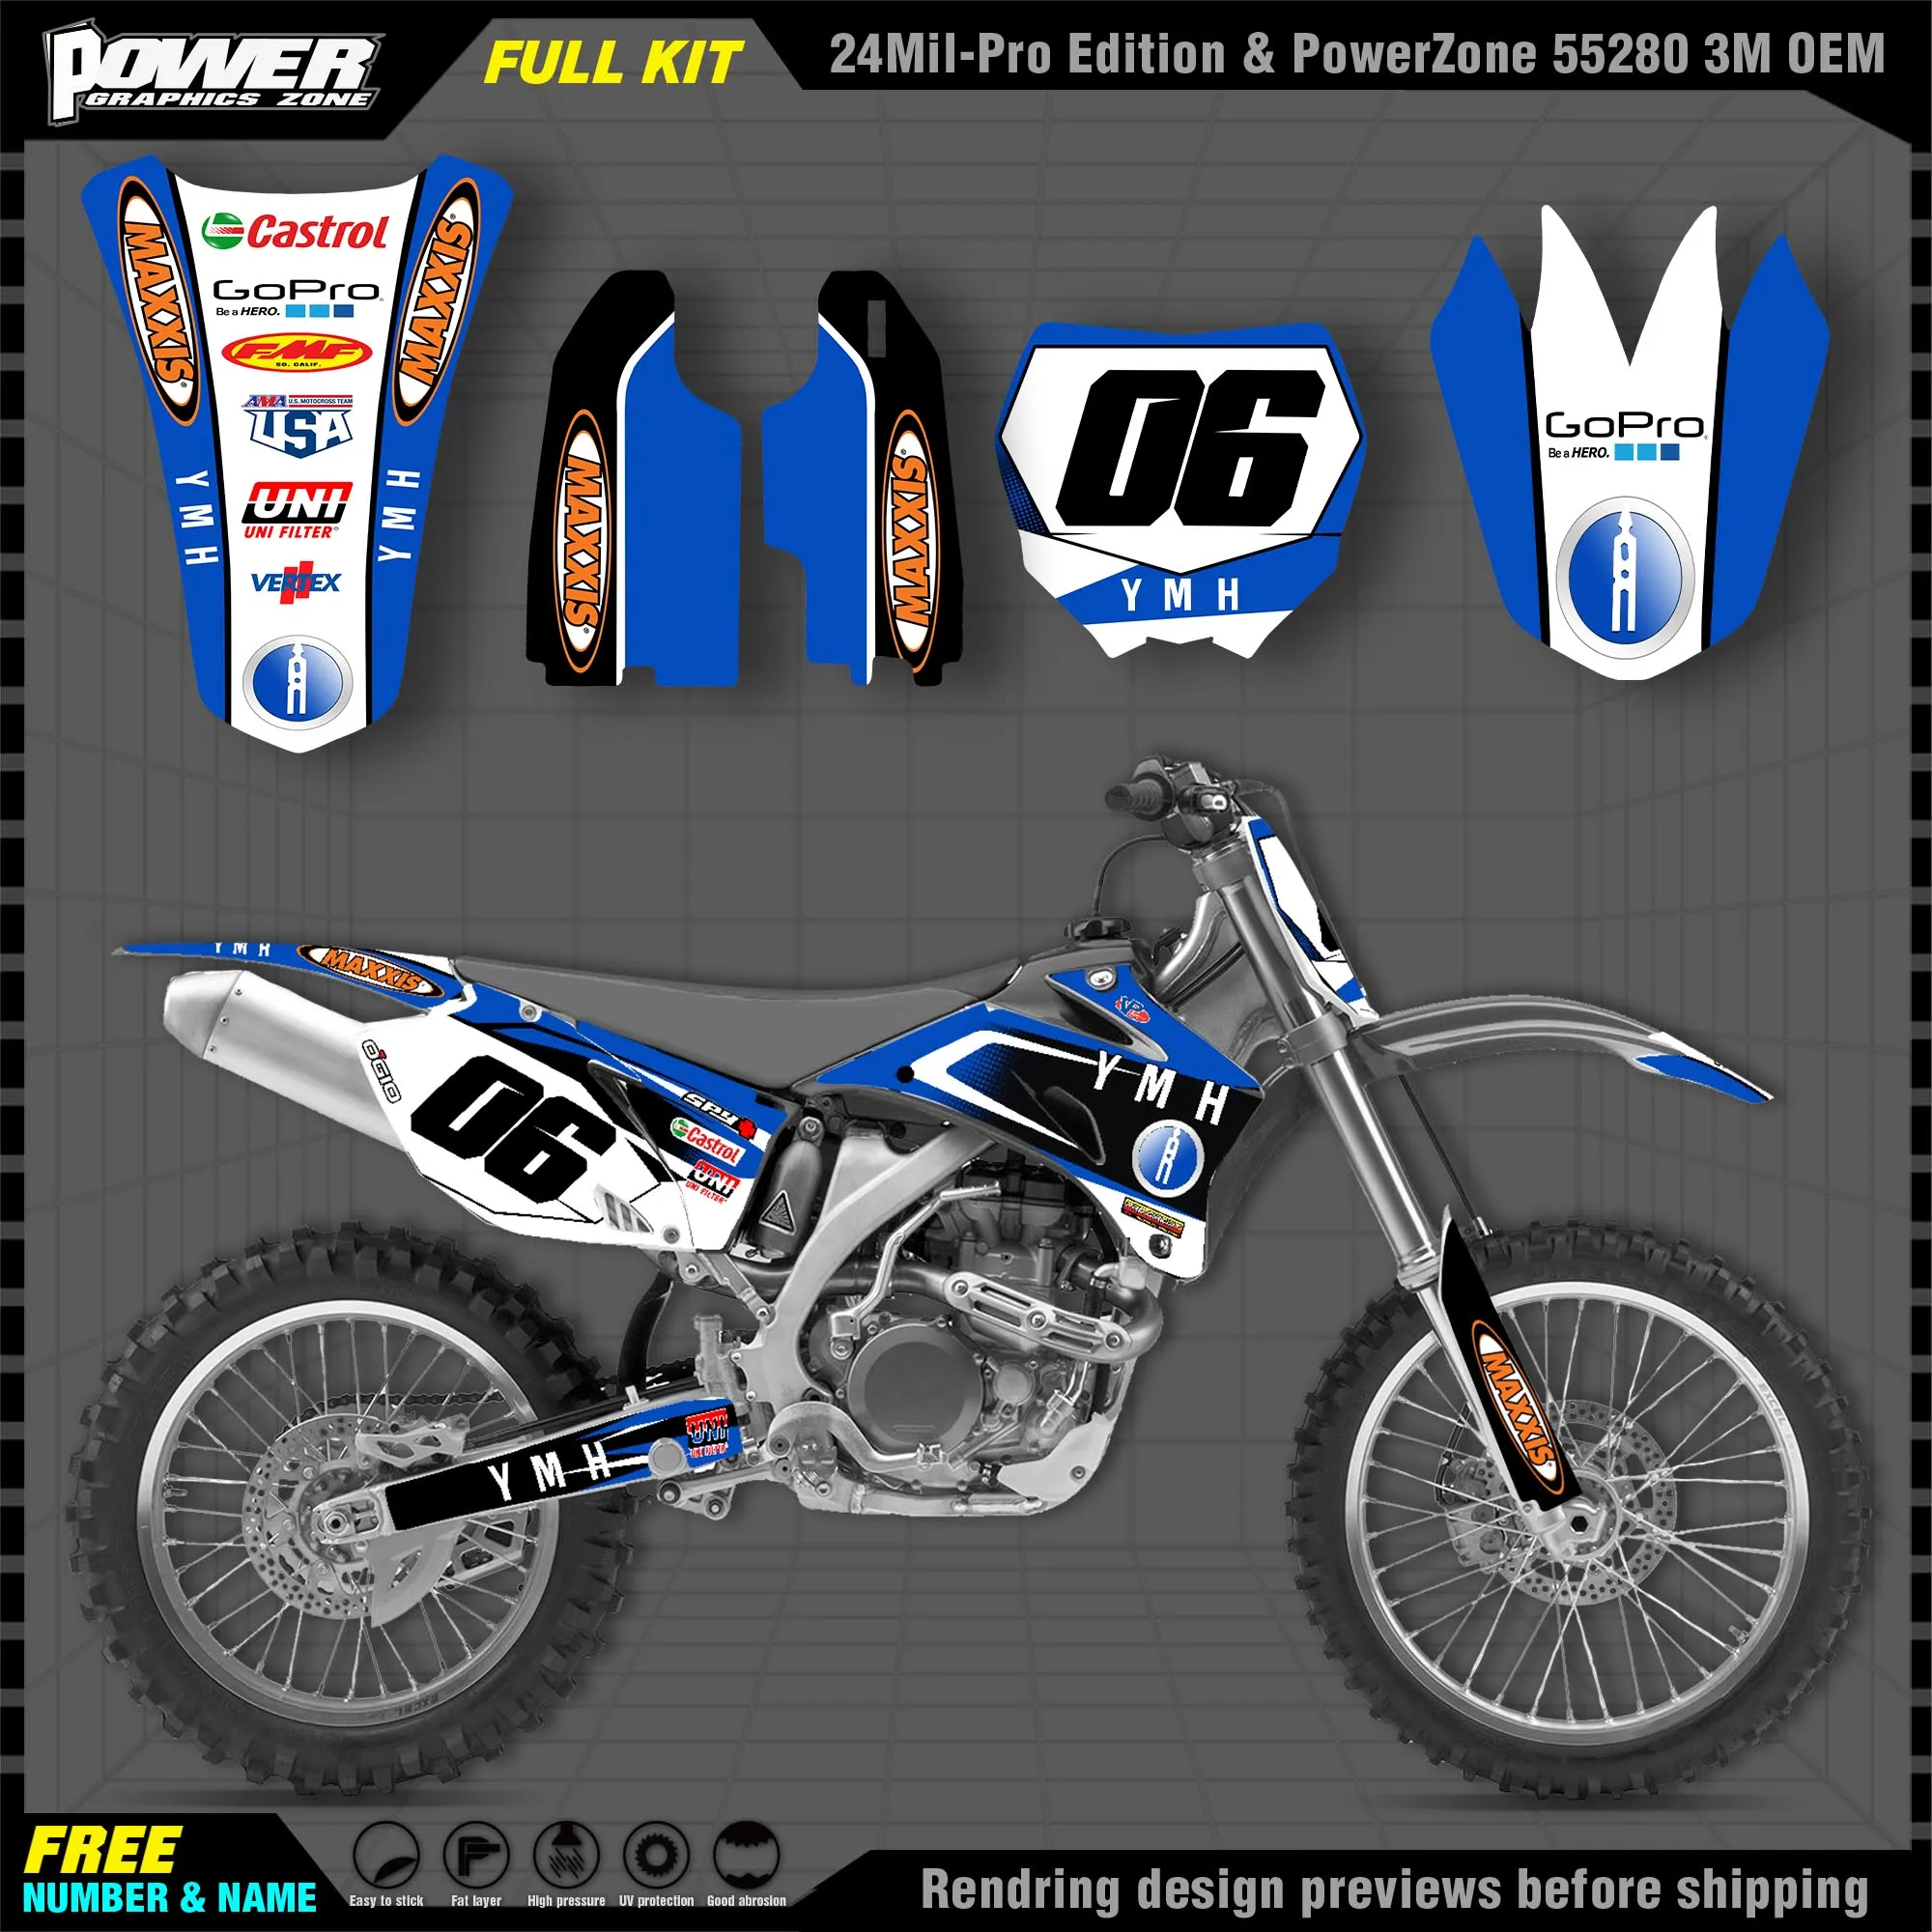 

PowerZone Custom Team Graphics Backgrounds Decals 3M Stickers Kit For YAMAHA 2006-09 YZF250 450 013